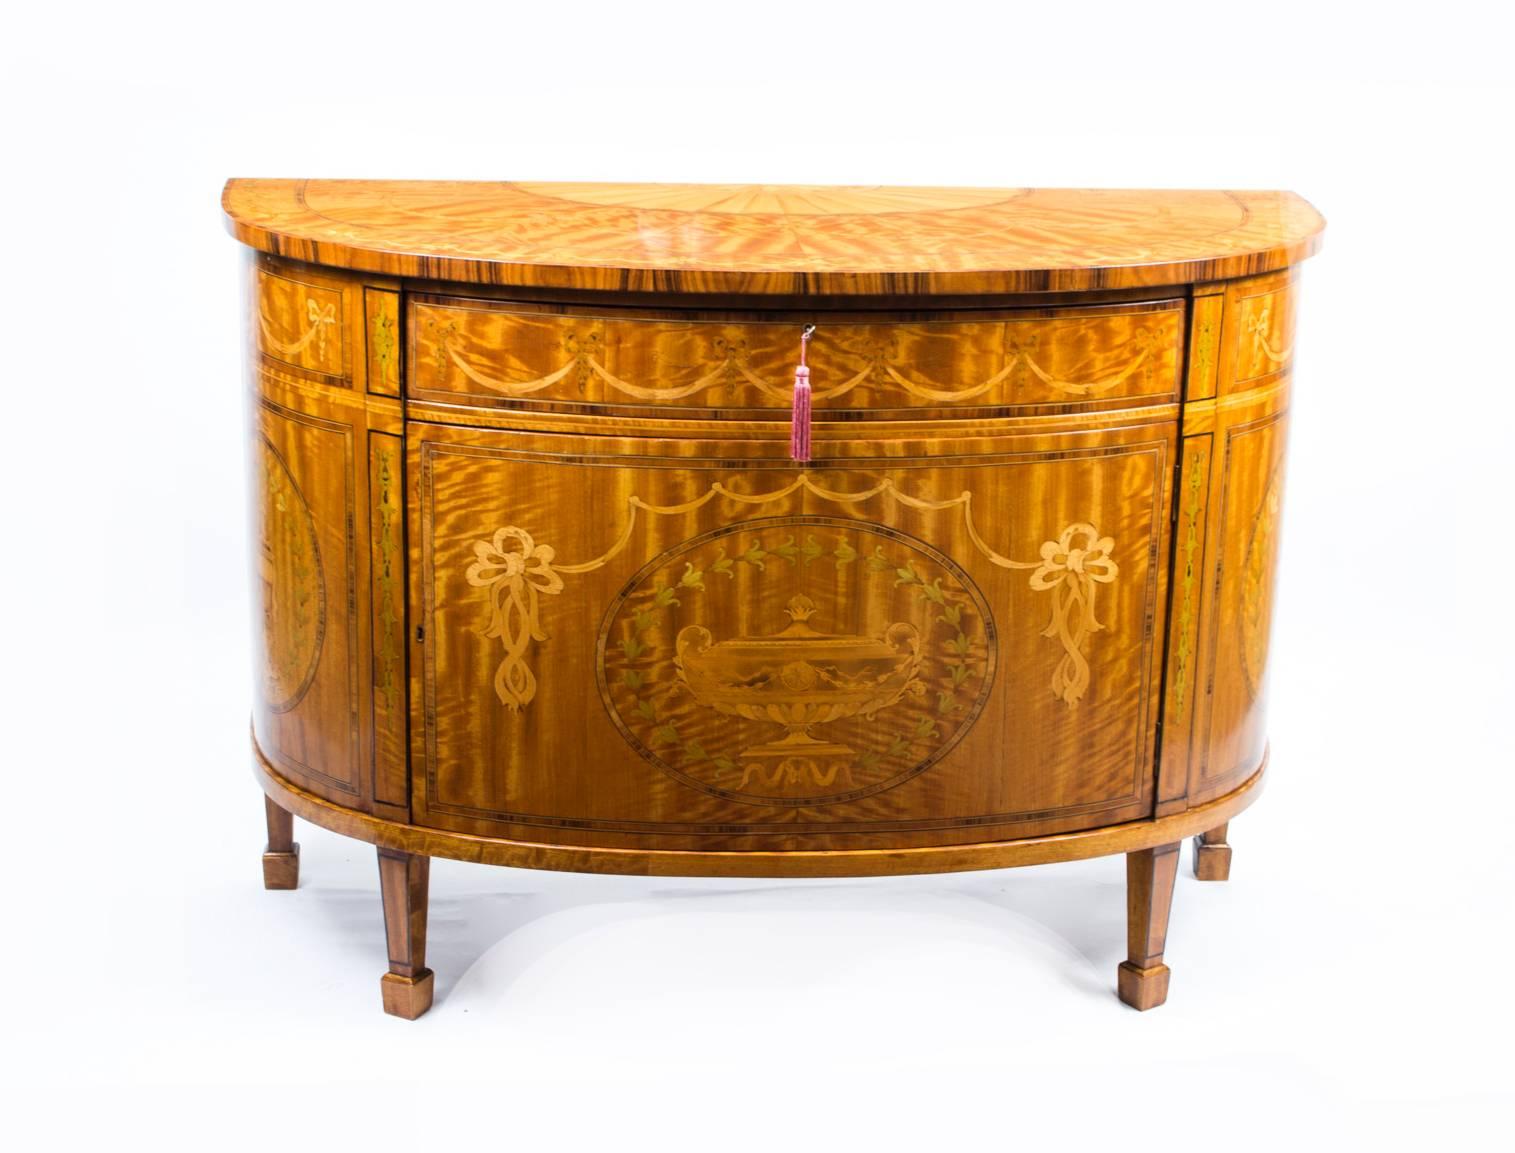 This is a gorgeous pair of George III style satinwood demilune commodes with fruitwood inlaid marquetry decoration, early 20th century in date.

Each chest has striking Santos rosewood crossbanding with a decorative shell rosette within a fan